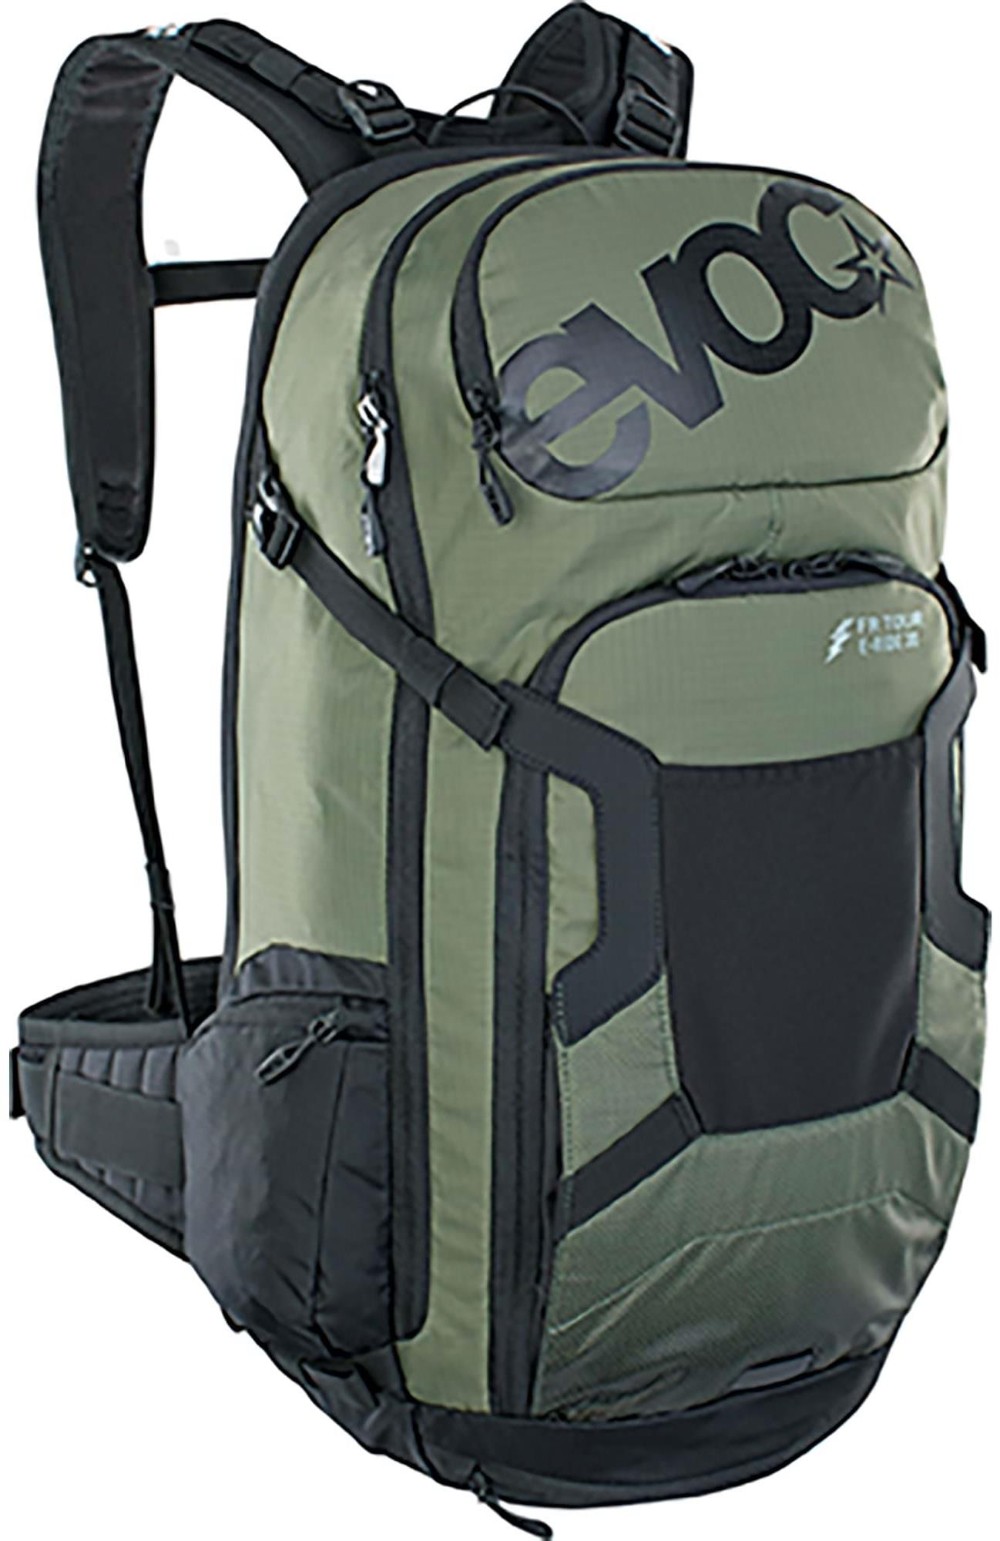 FR Tour E-Ride 30L Protector Backpack image 0